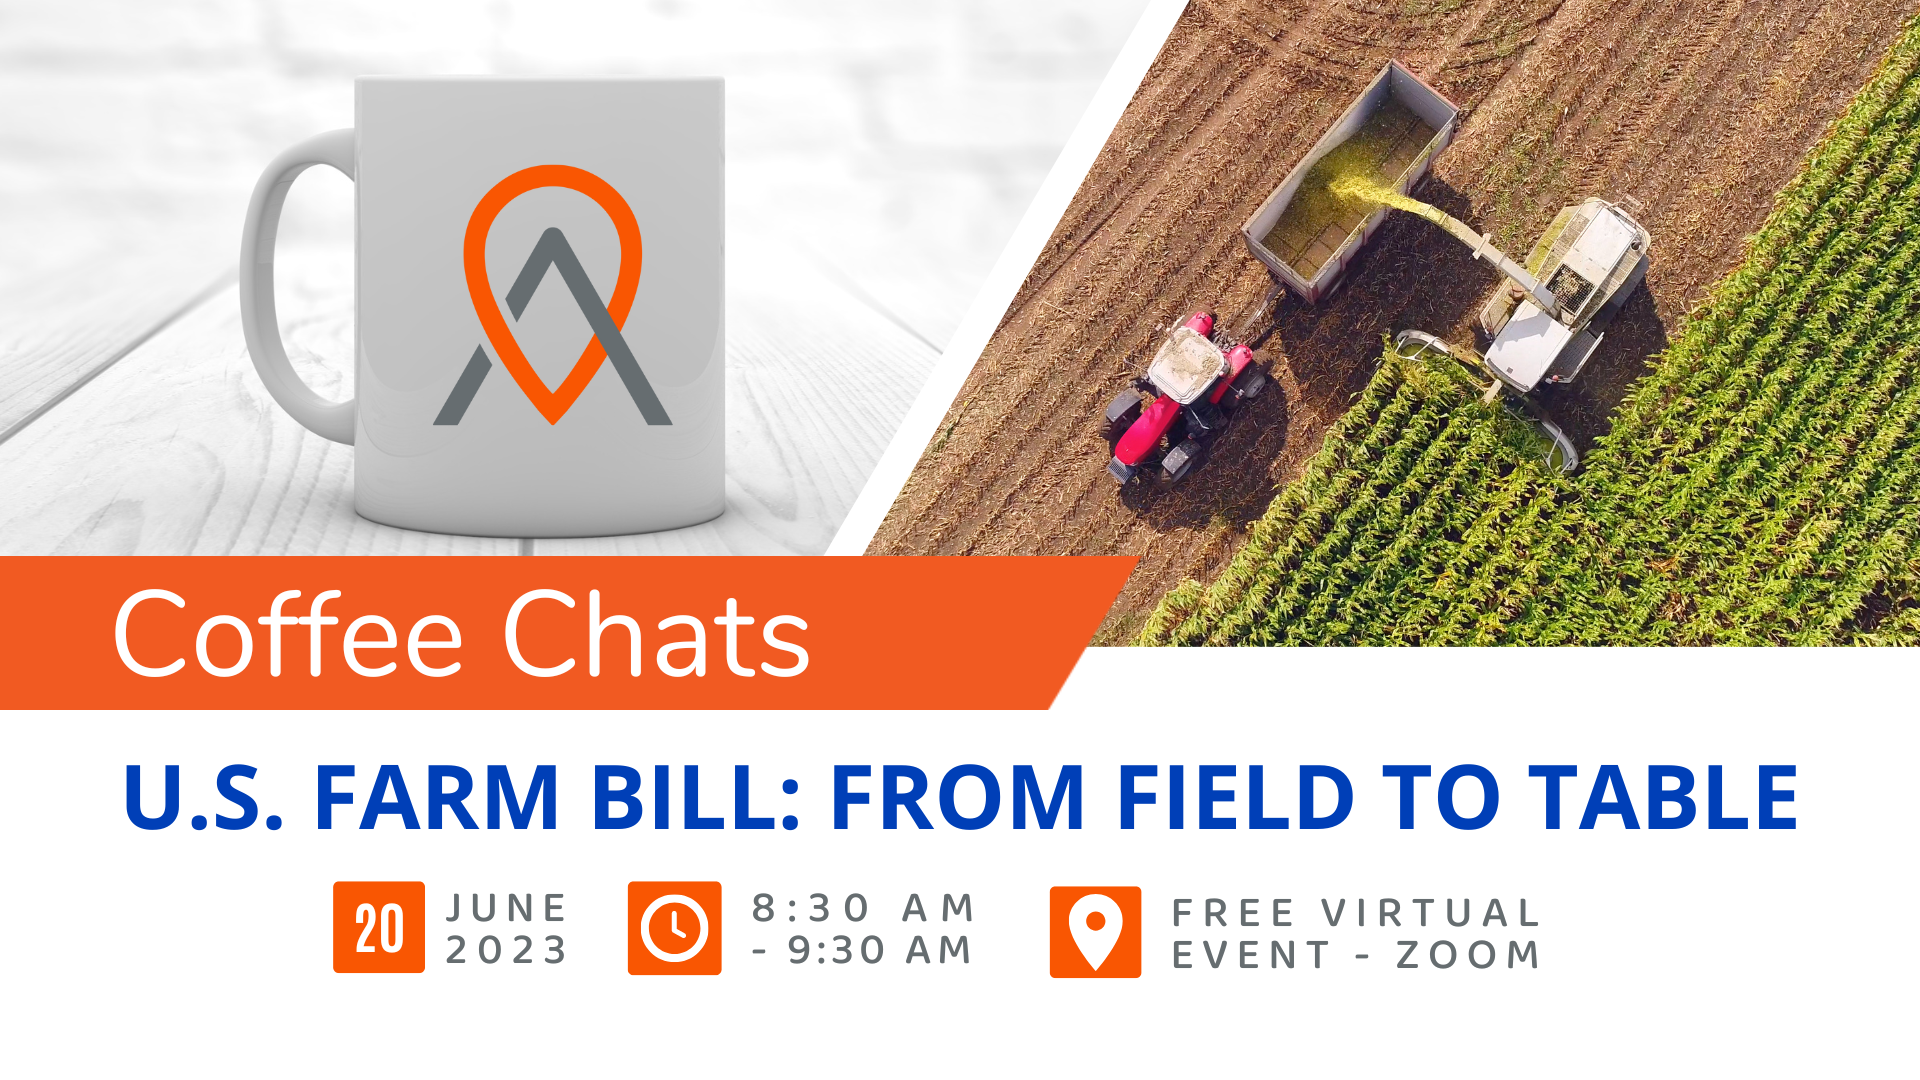 Coffee Chats - U.S. Farm Bill: From Field to Table Photo